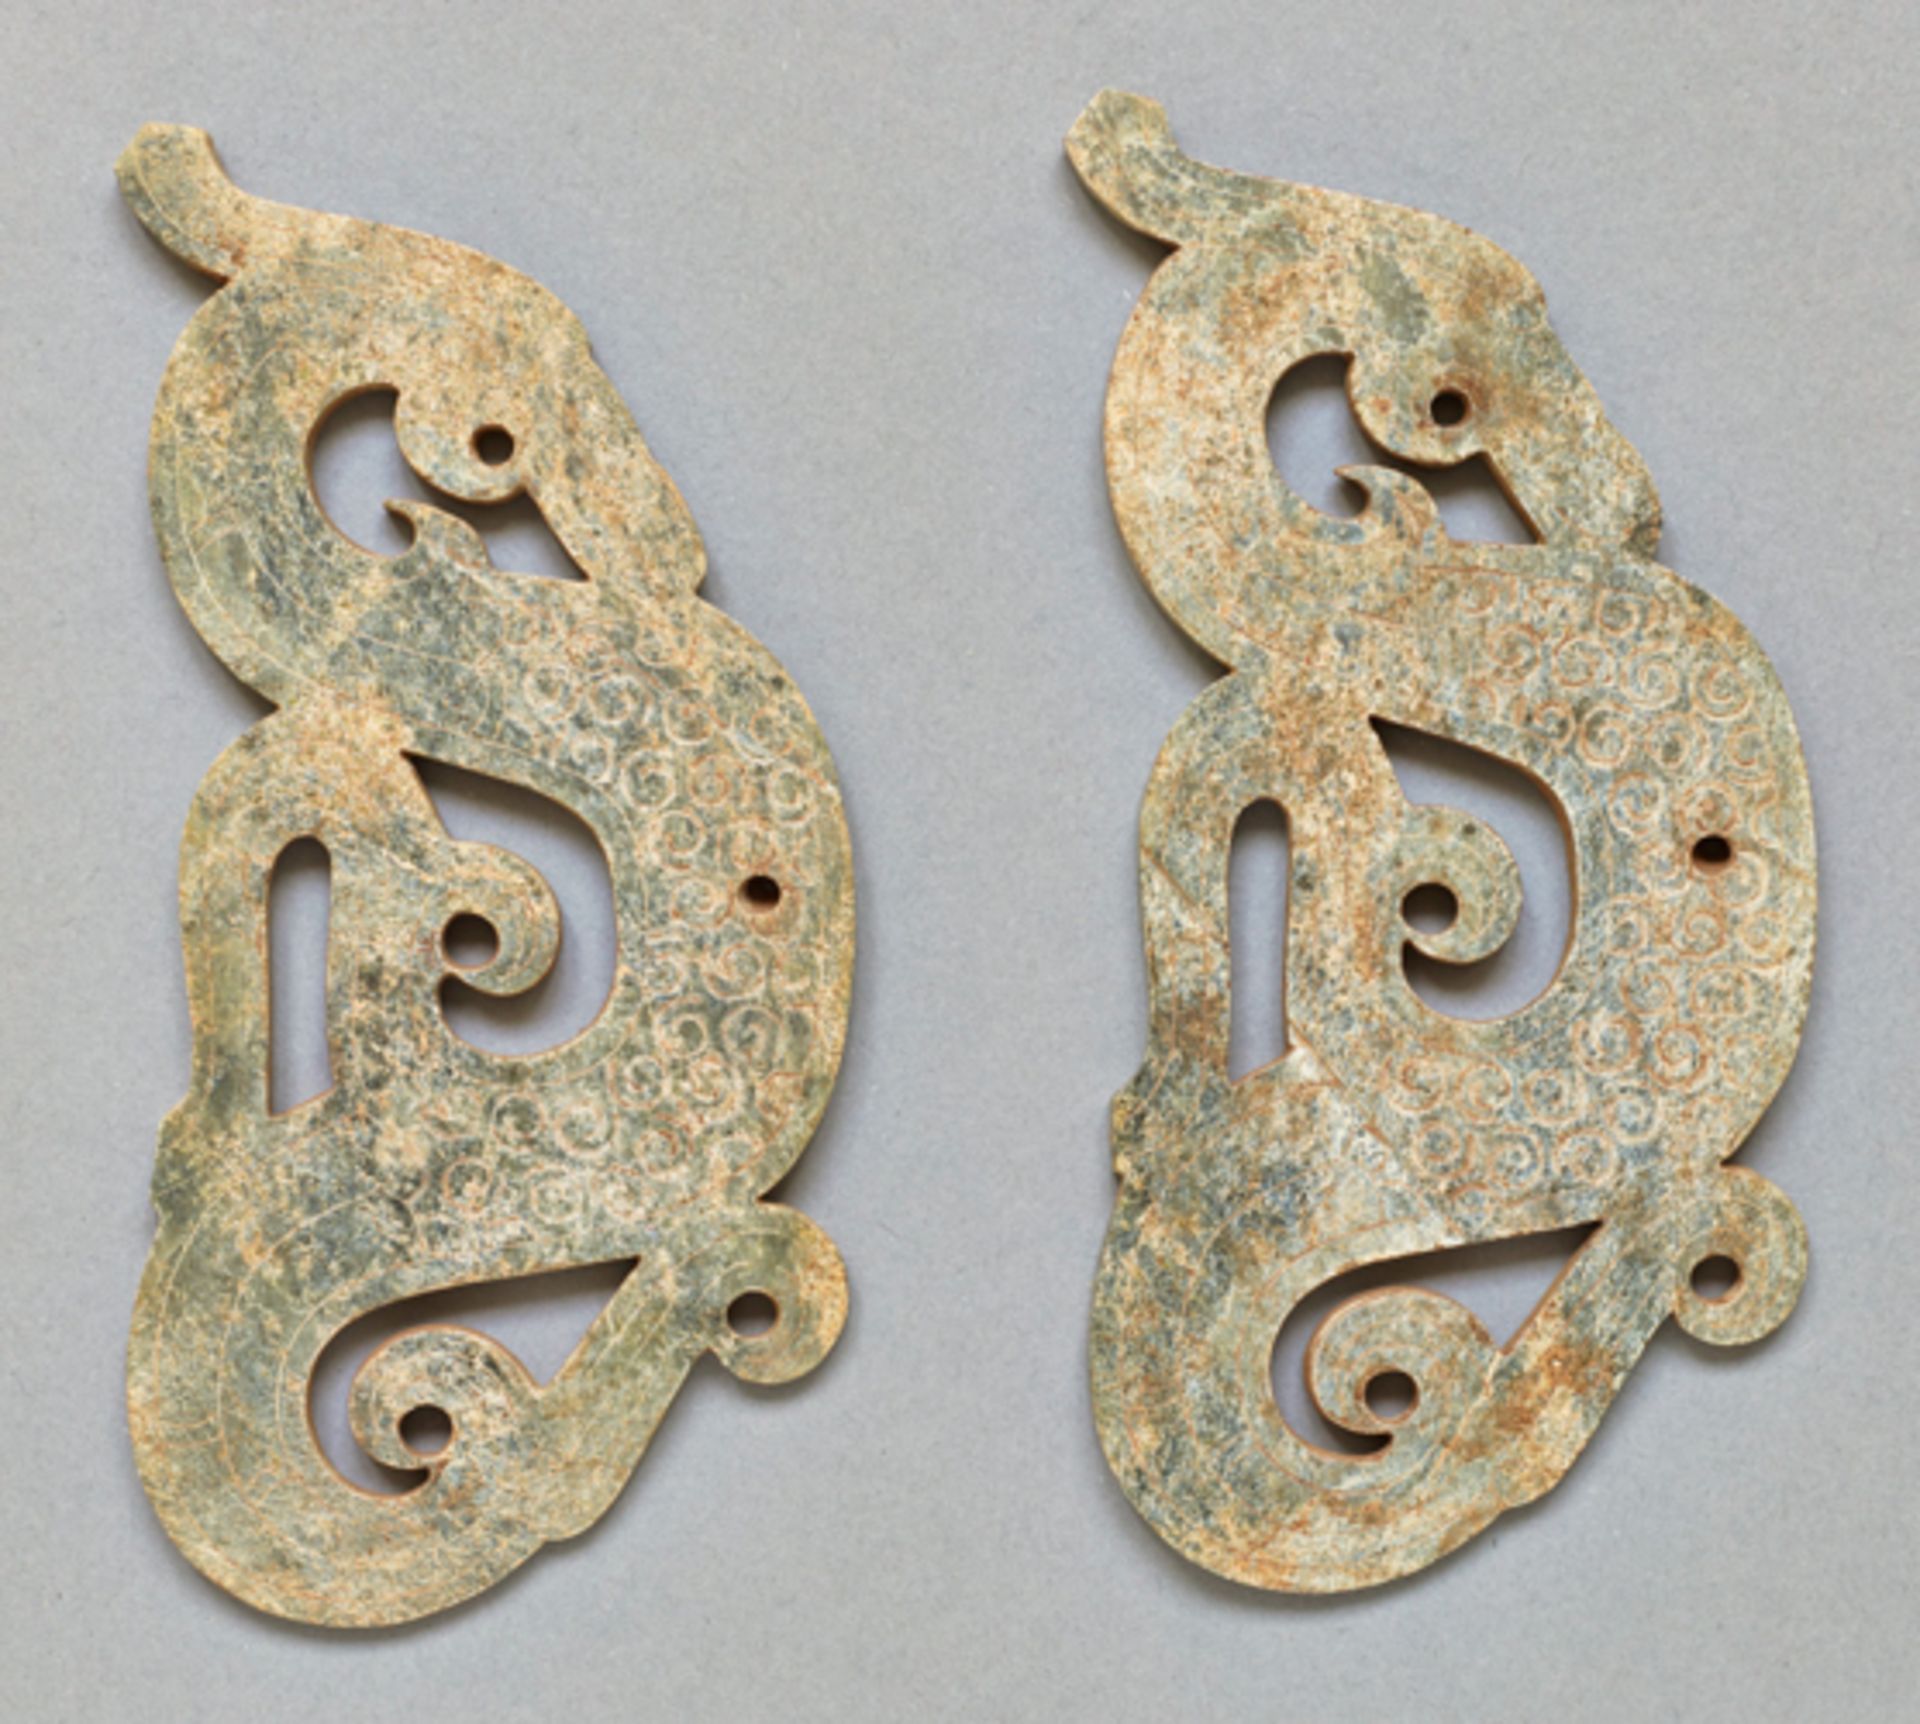 PAIR OF DRAGON PENDANTS  Jade. Eastern Zhou period, 4th cent. BC  ?????? - ??, ???4??  ? 14.3 ??; ??